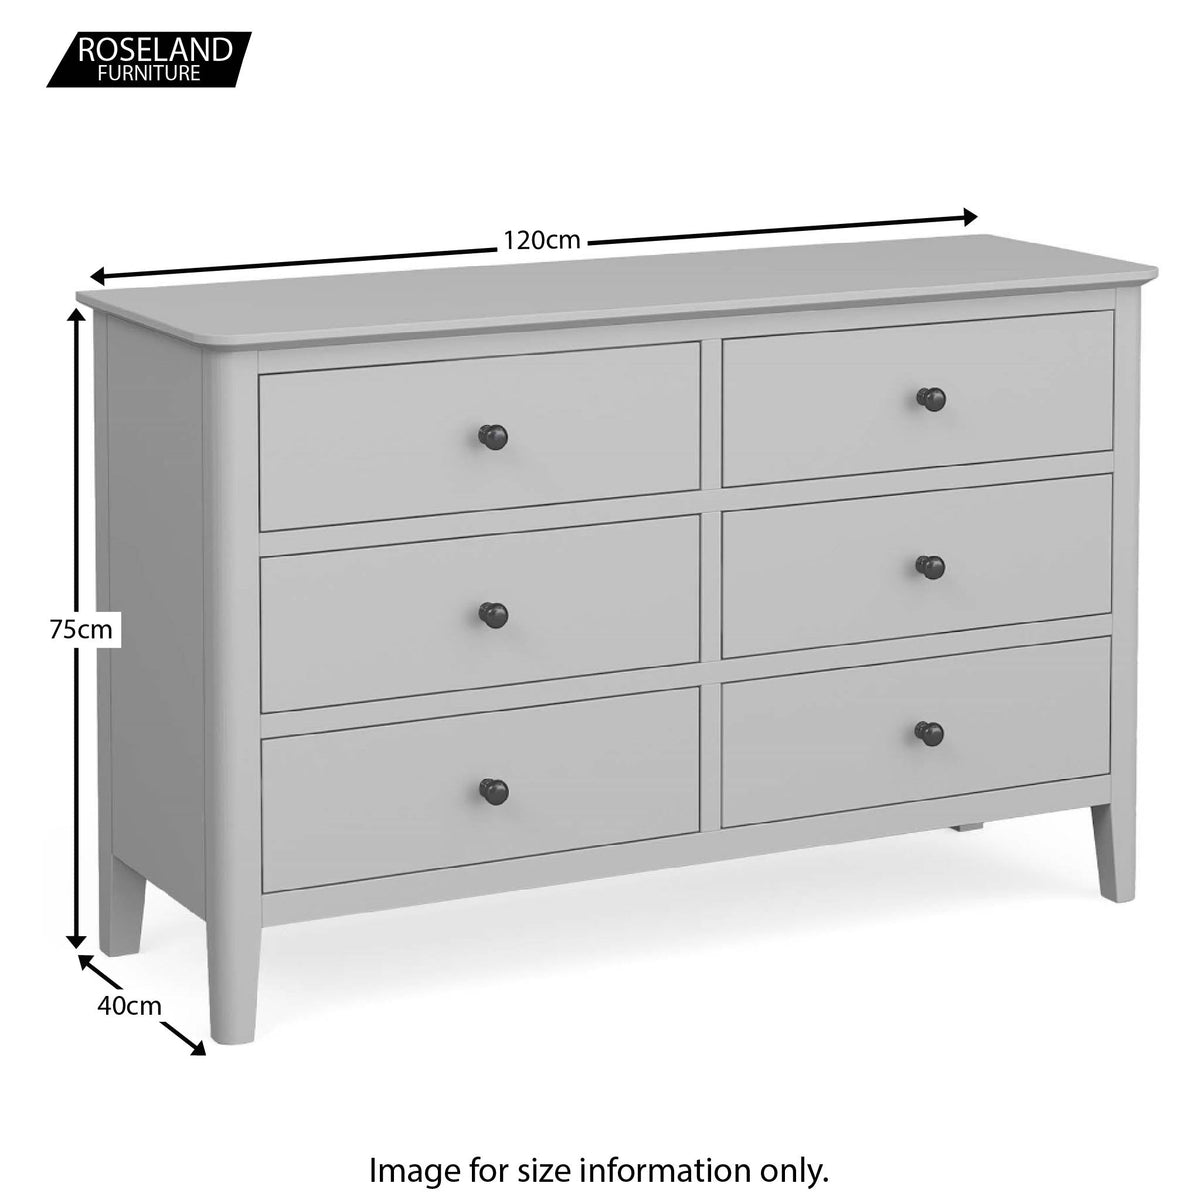 Elgin Grey 3 over 3 Chest of Drawers size guide